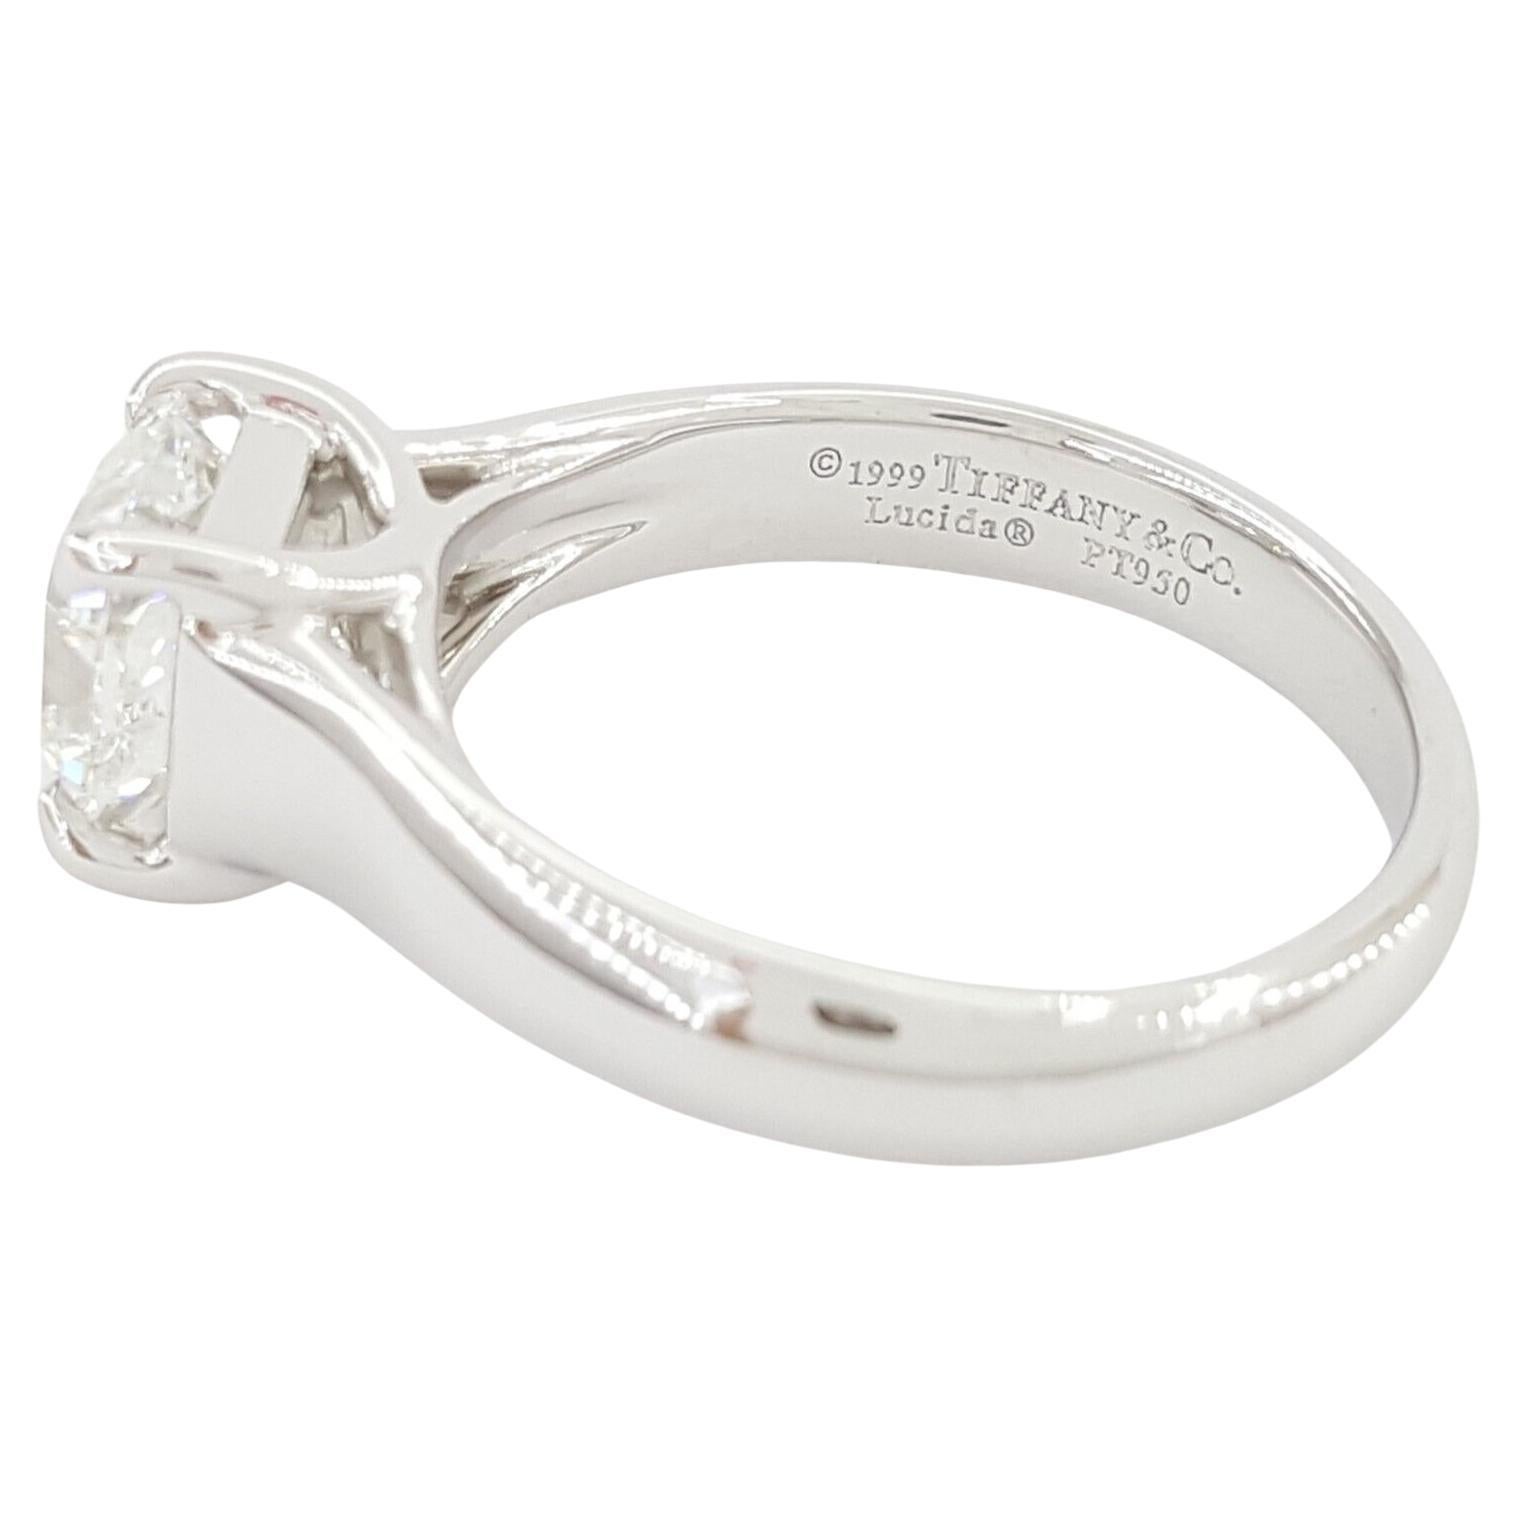 Authentic Tiffany & Co. Platinum 1.19 ct Lucida Square Brilliant Cut Diamond Solitaire Engagement Ring.
The ring weighs 5.1 grams, size 3.75 (can be resized to a larger size), the center stone is a Natural 1.19 ct Lucida Square Brilliant Cut